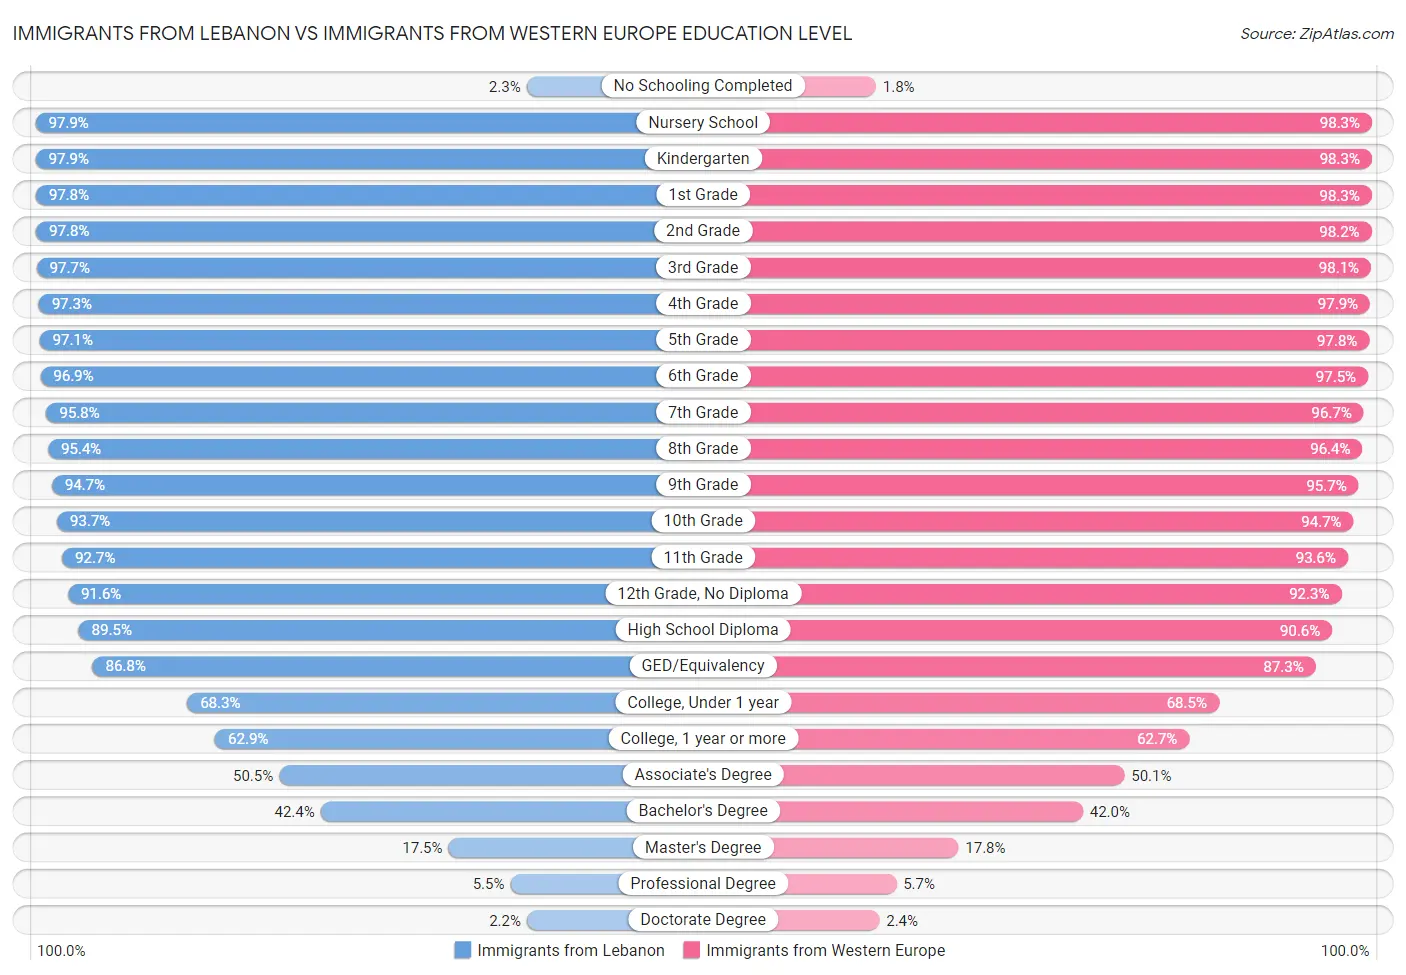 Immigrants from Lebanon vs Immigrants from Western Europe Education Level